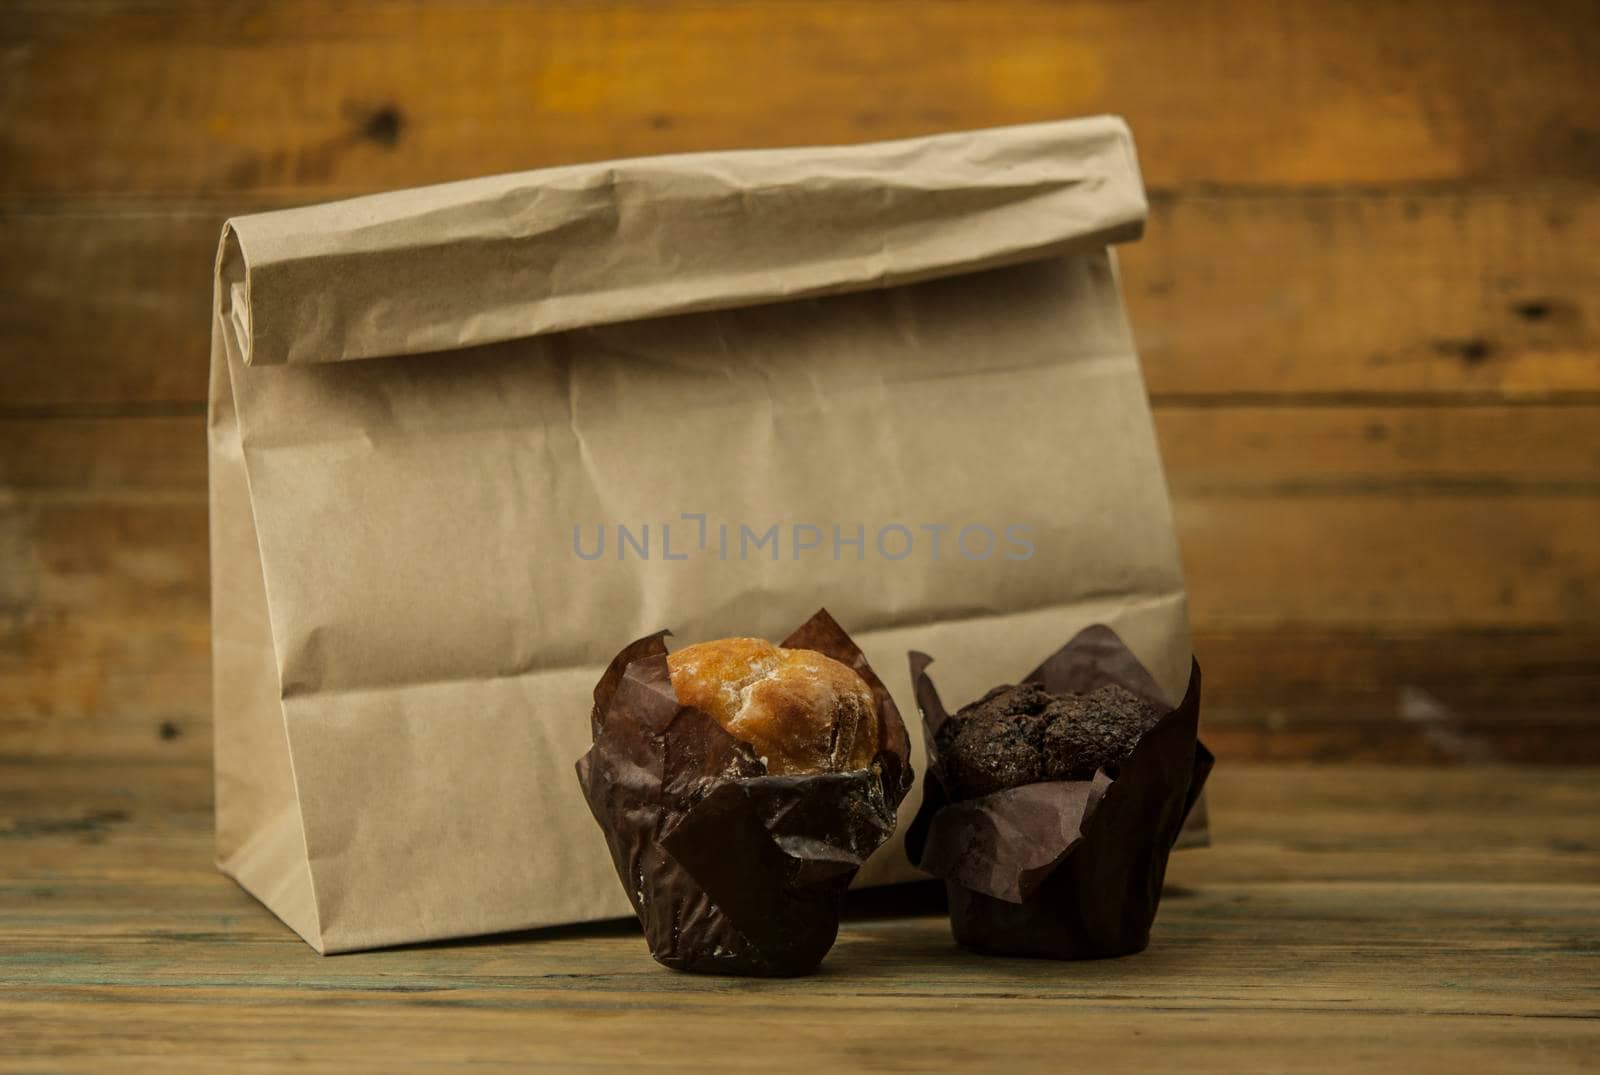 Homemade chocolate and vanilla cupcakes with paper lunch bag on a wooden table, sprinkled with powdered sugar. by inxti